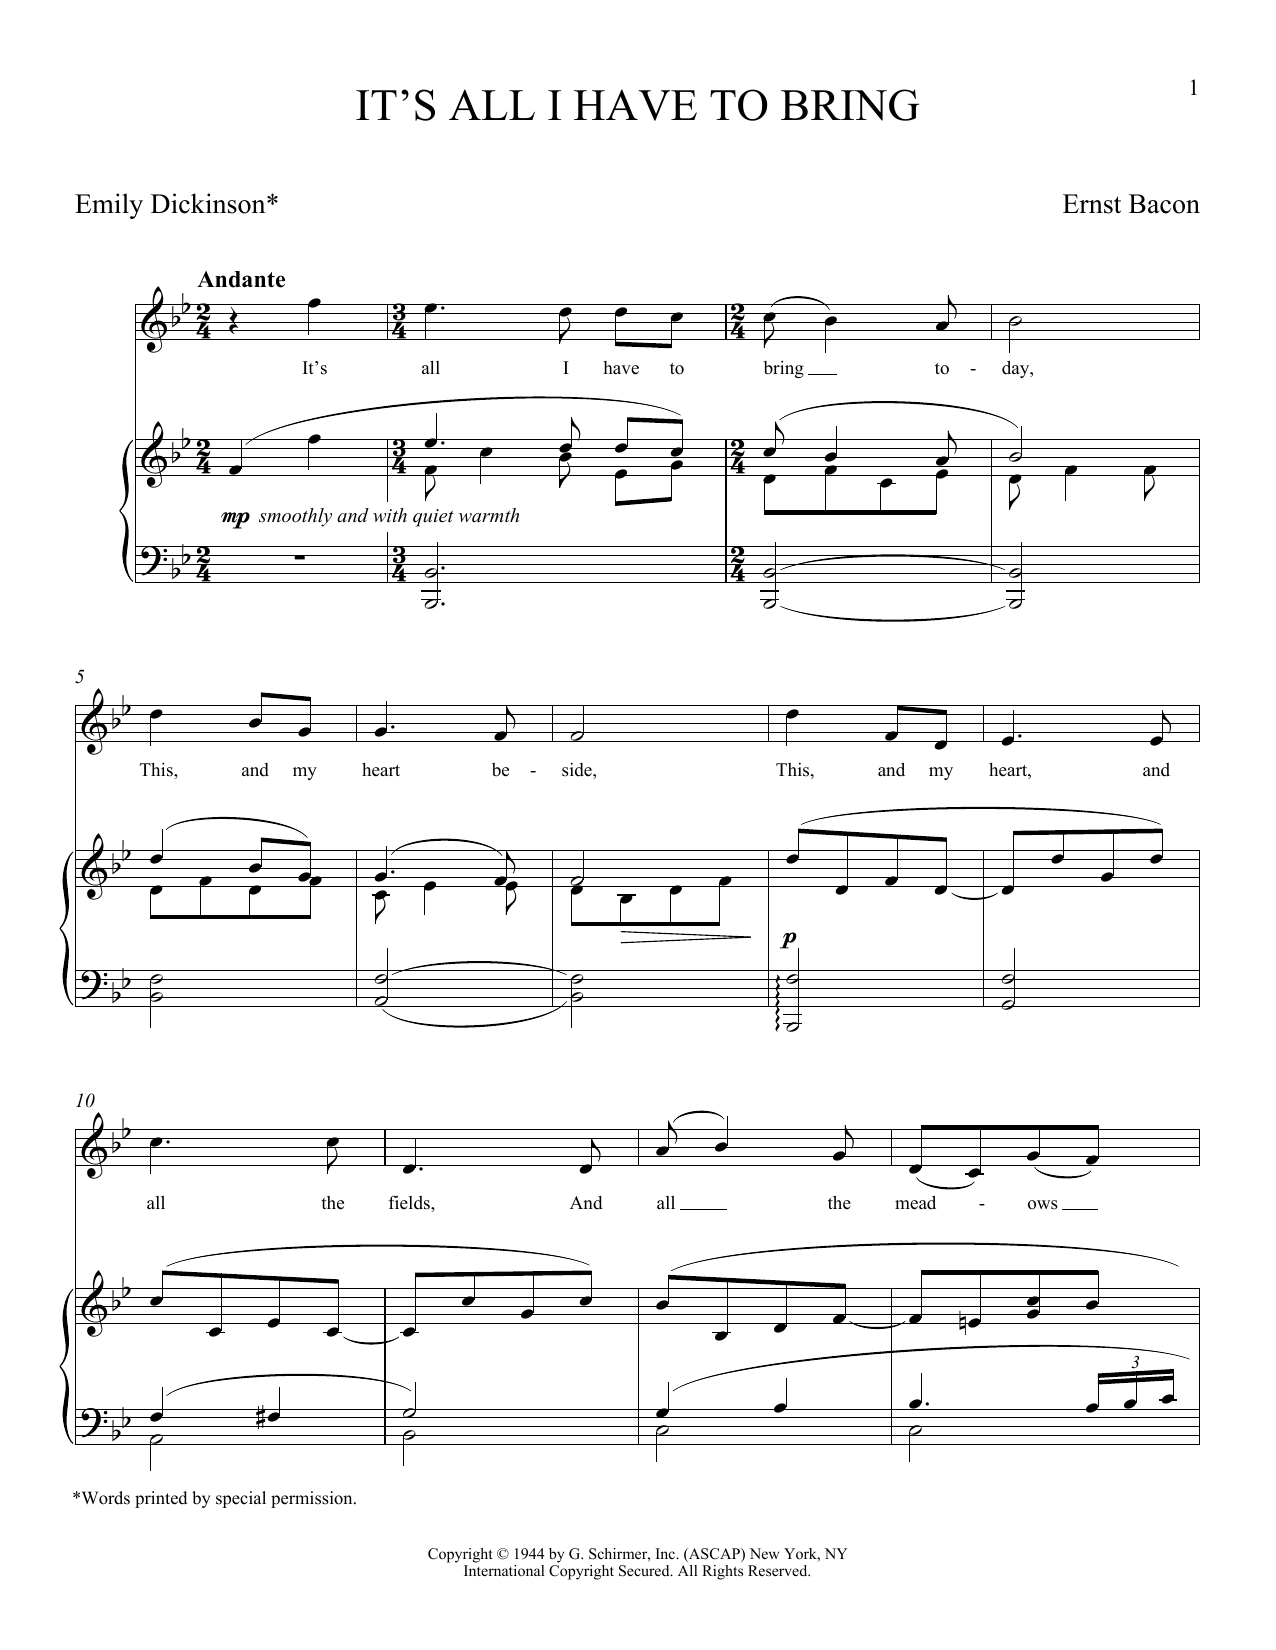 Download Emily Dickinson It's All I Have To Bring (Bacon) Sheet Music